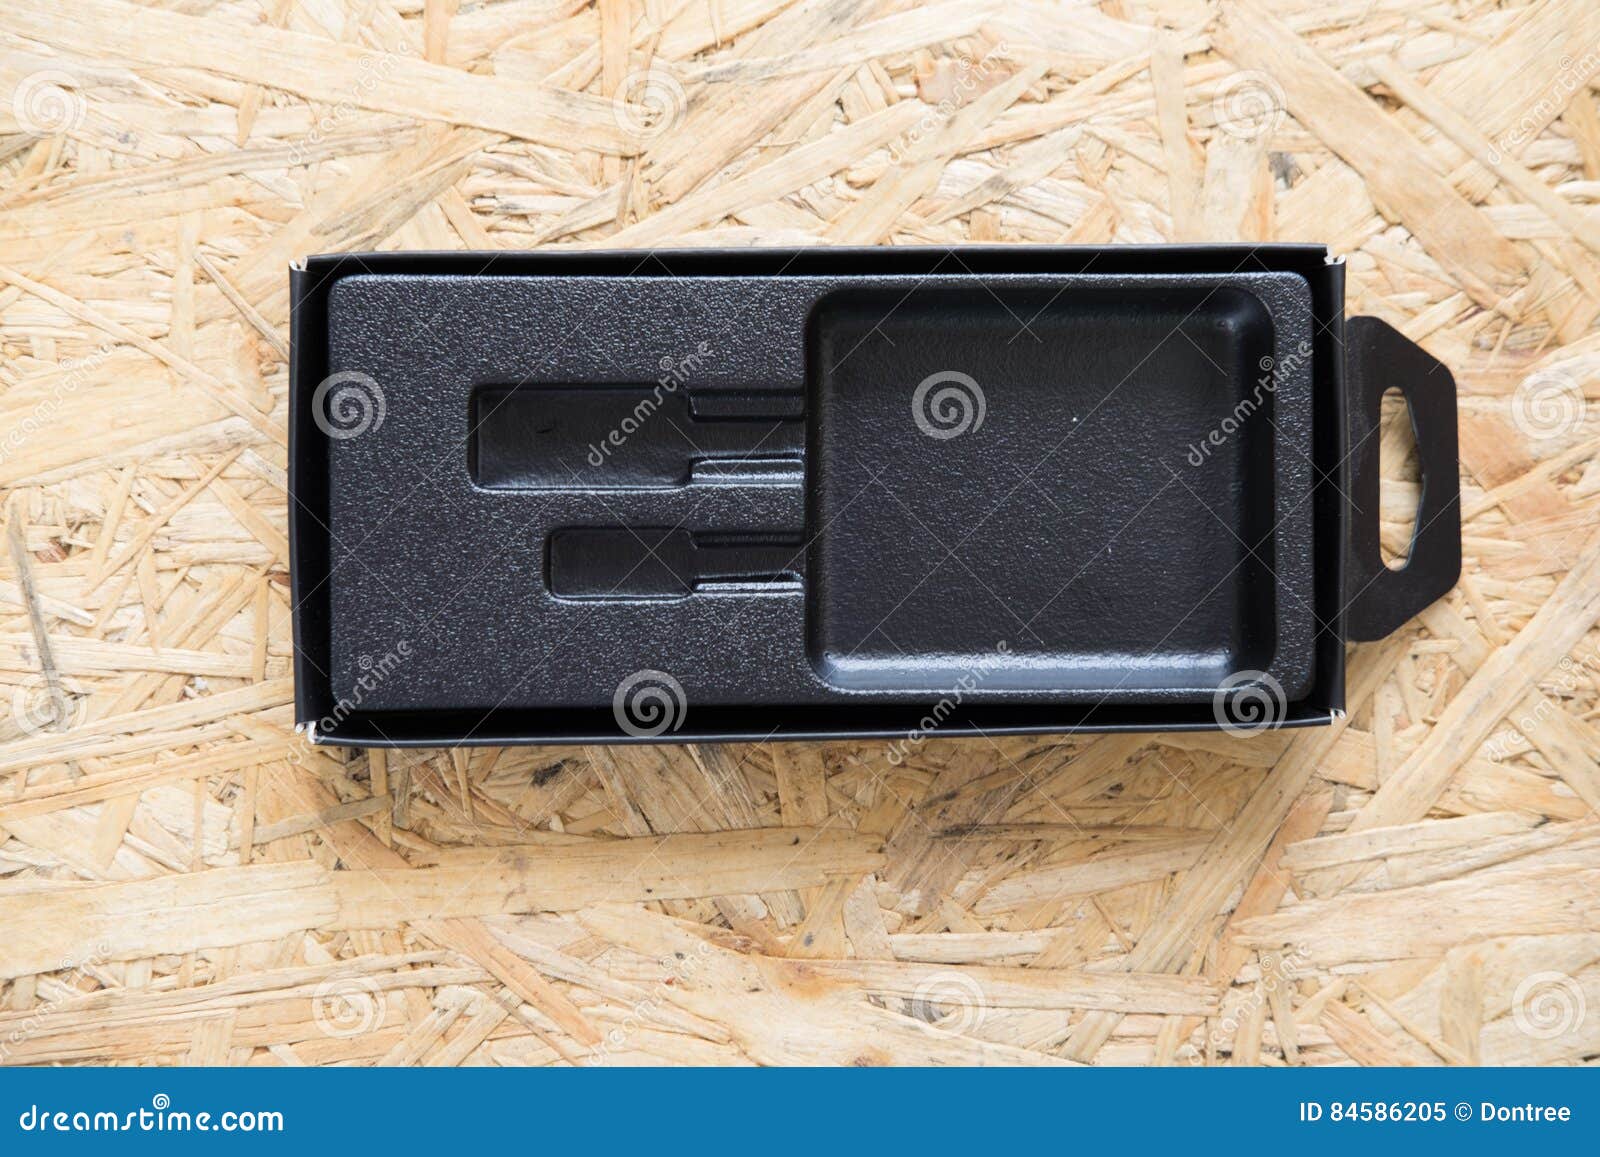 Download Mockup, Black Box Package For Other Things Stock Image ...